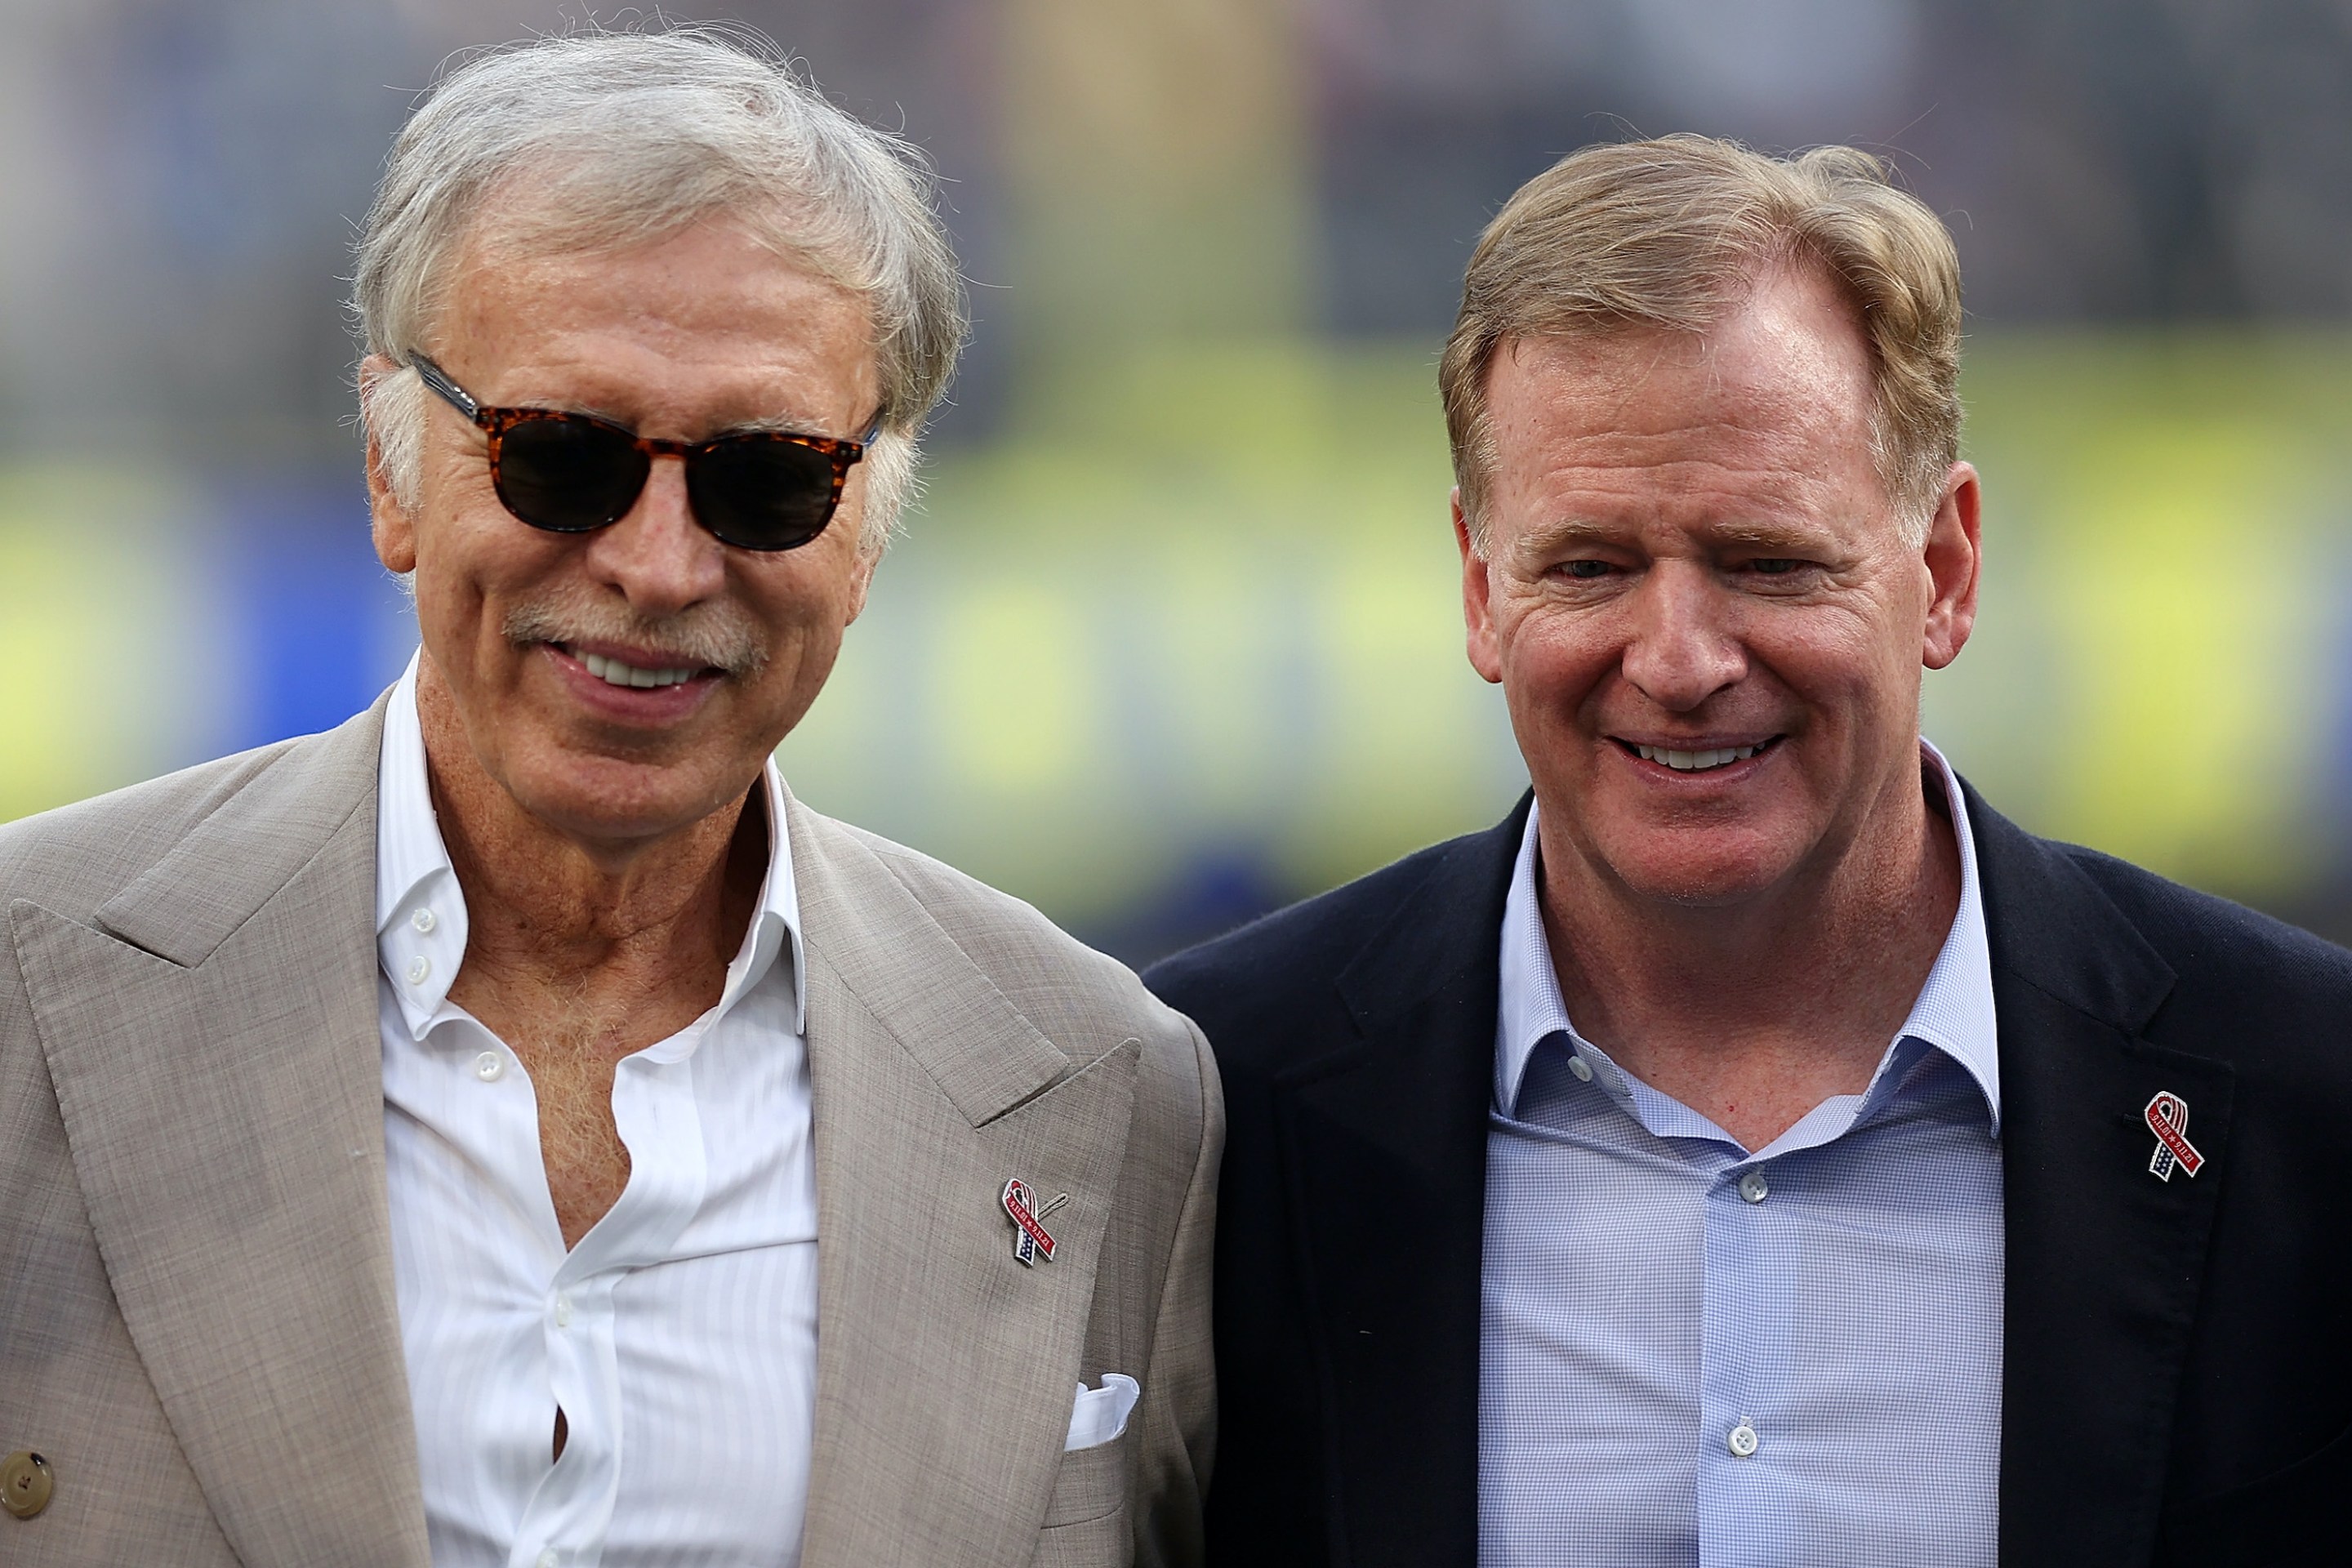 Los Angeles Rams team owner Stan Kroenke and NFL commissioner Roger Goodell pose for a picture prior to a game against the Chicago Bears at SoFi Stadium on September 12, 2021 in Inglewood, California.